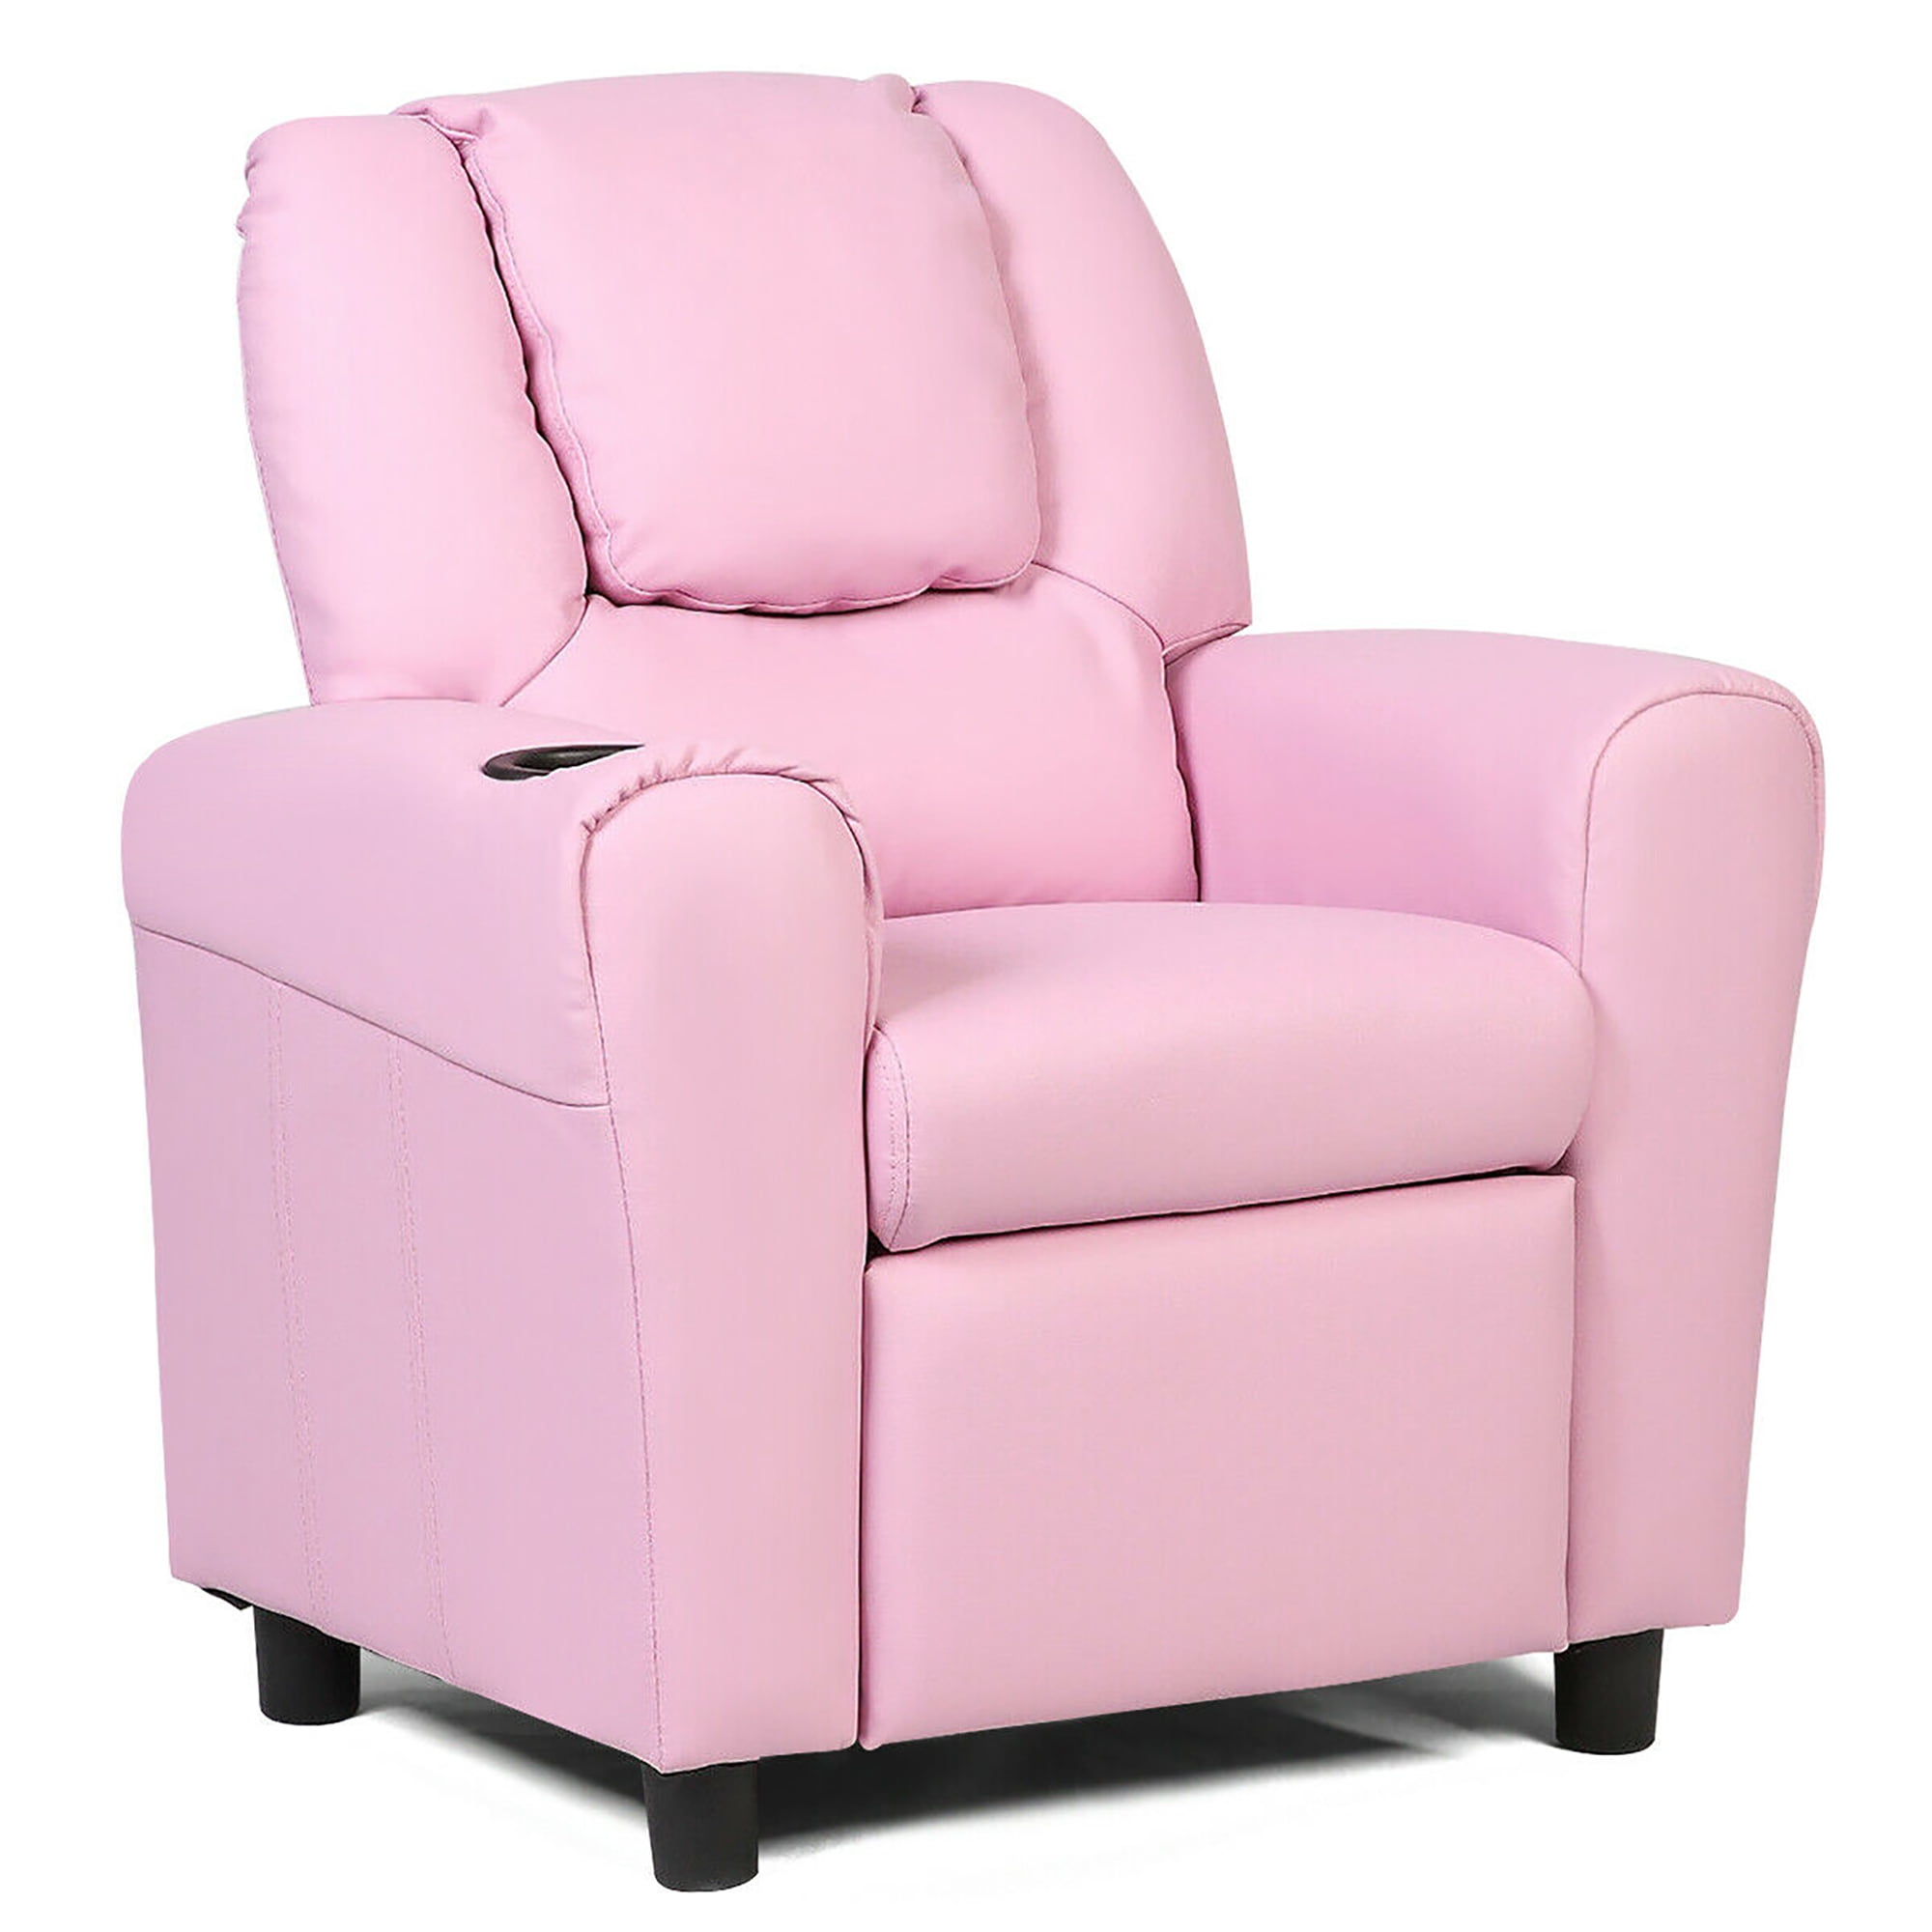 Children's Furniture Sofa Kids Recliner Armchair Seat Couch Chair w/Cup Holder 